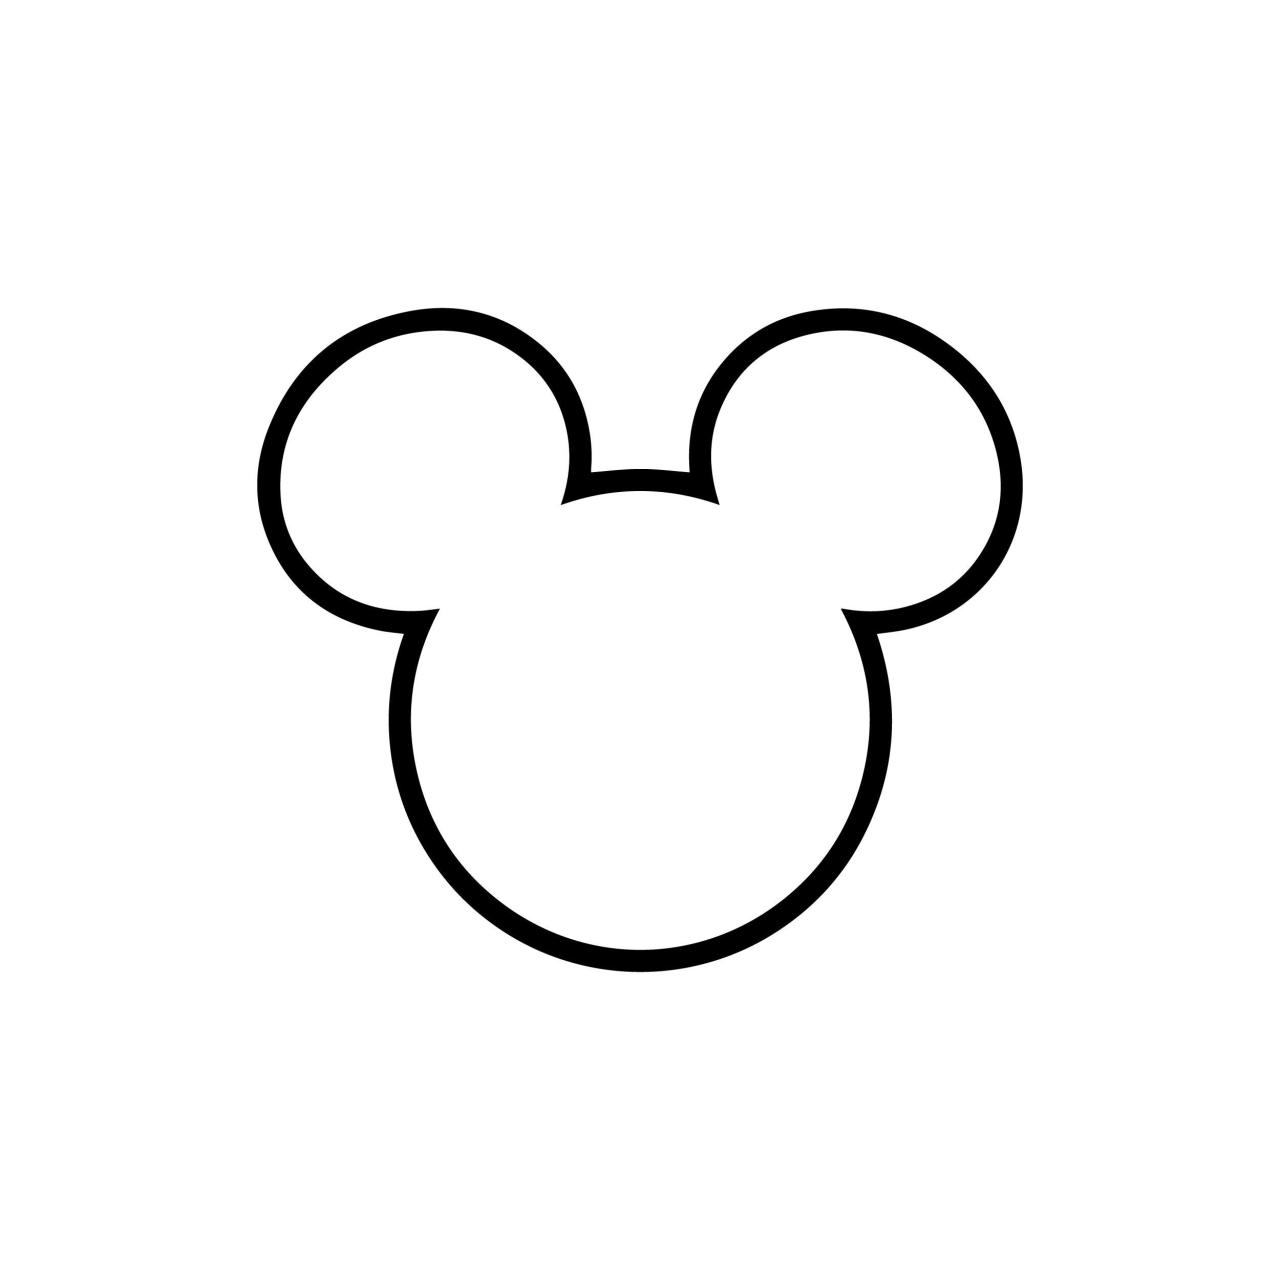 Mickey Mouse Head Outline Svg Freee